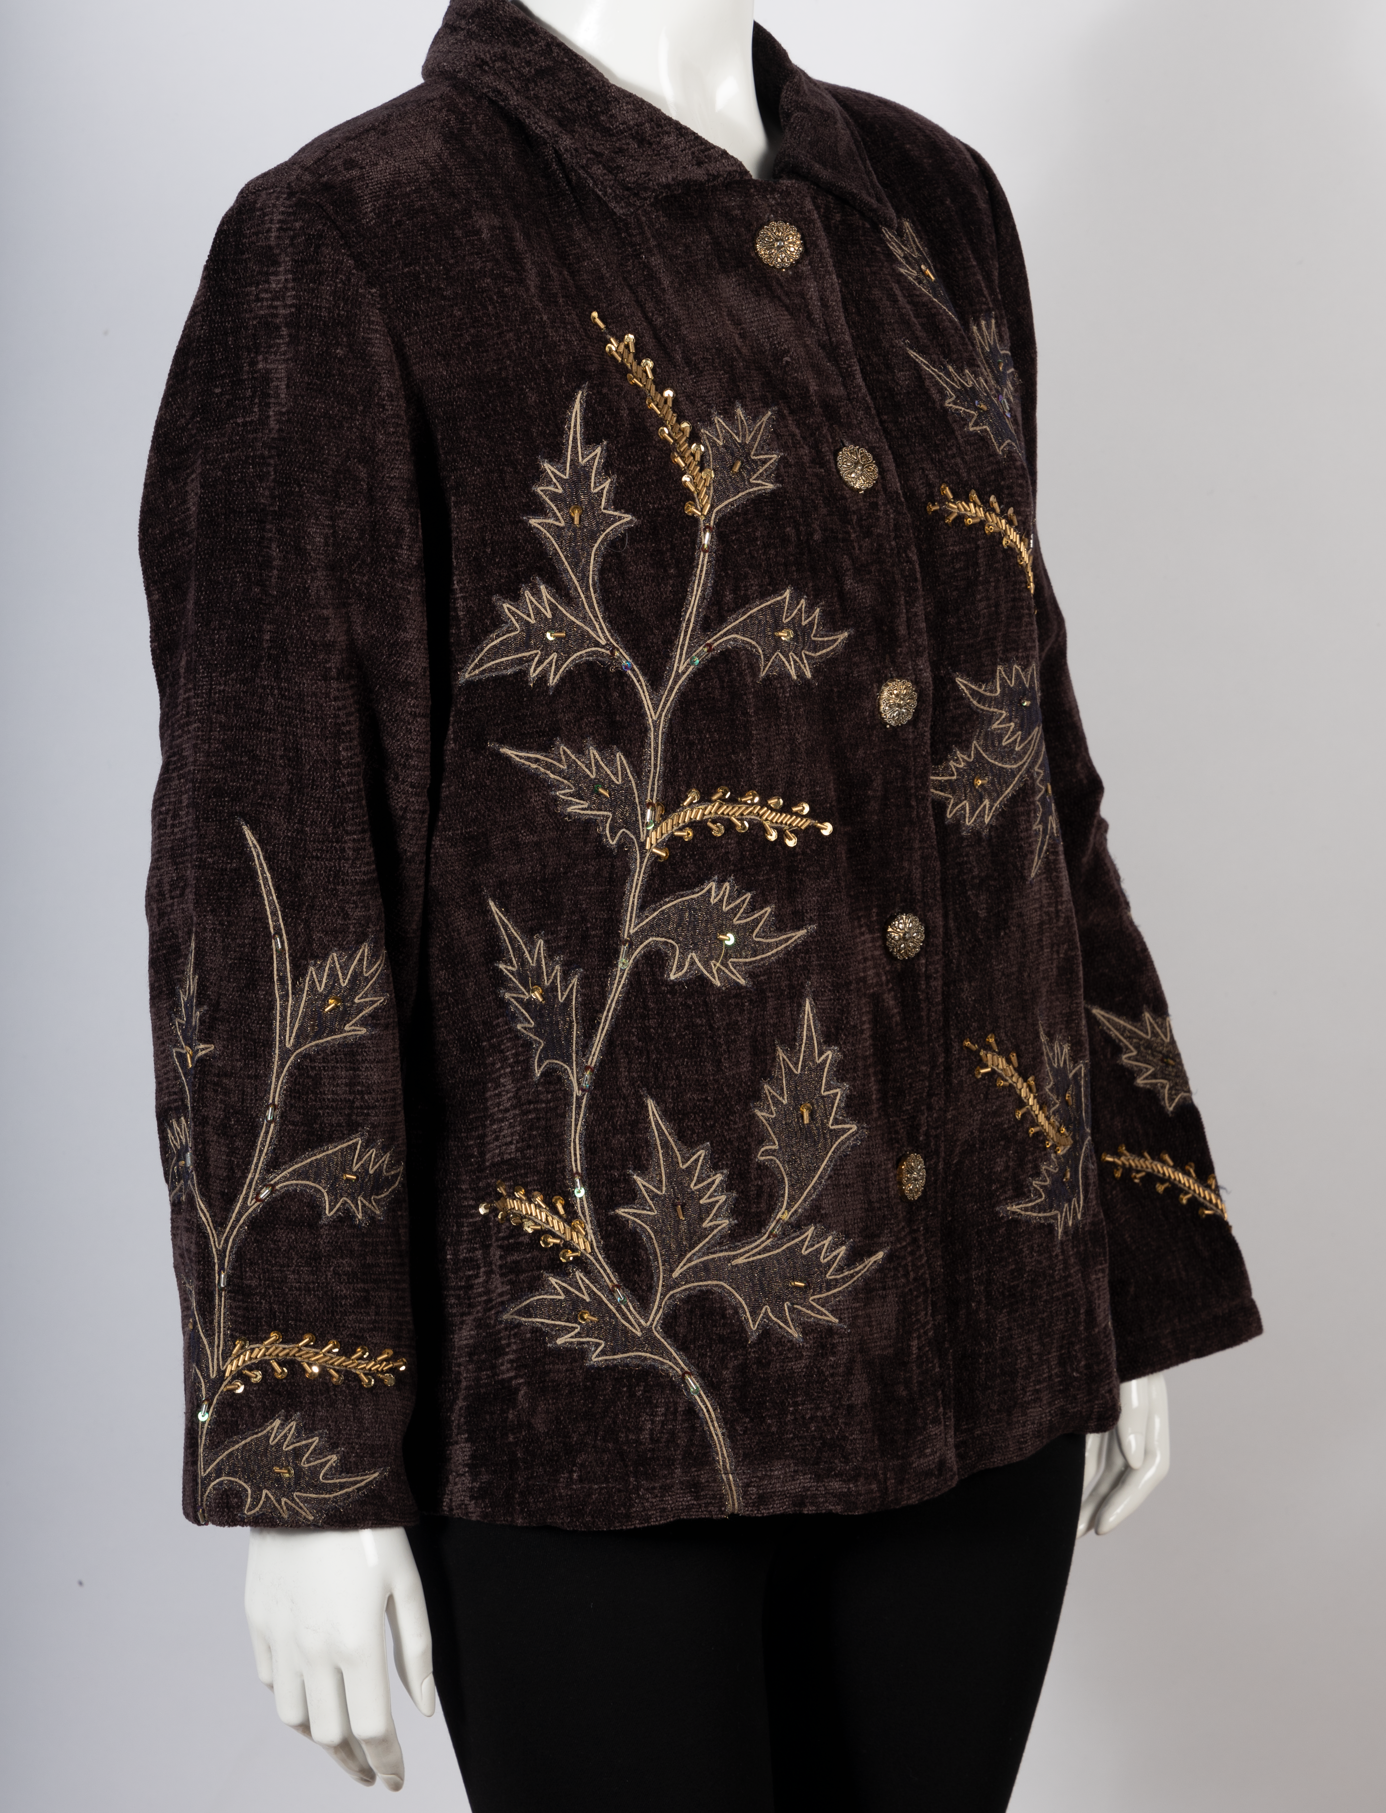 Brown Art Jacket with Beautiful Golden Embroidery